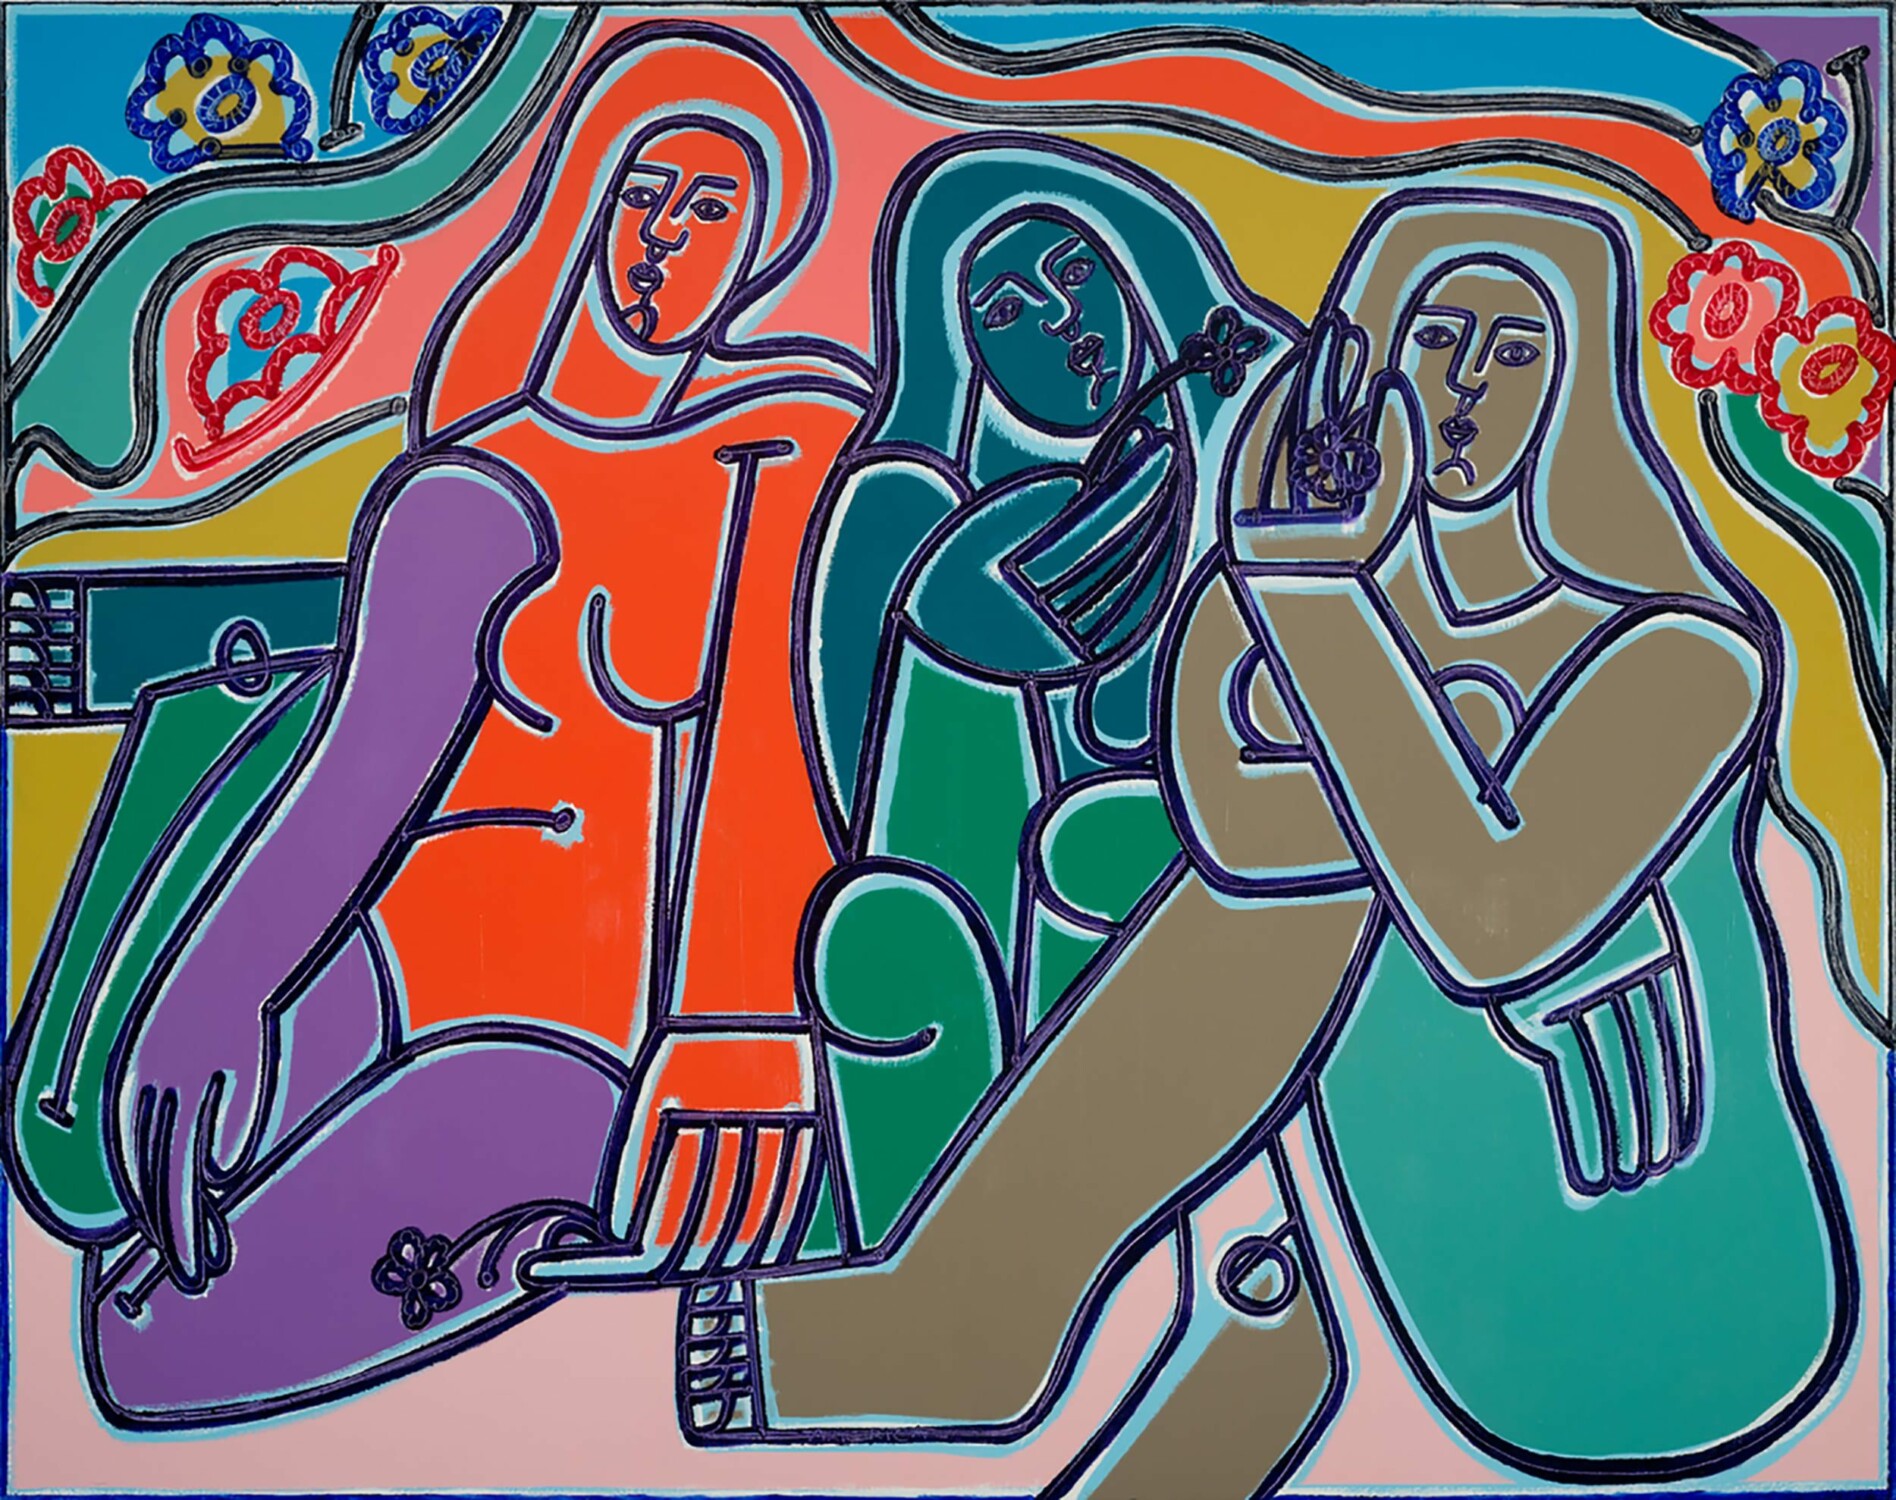 America Martin. Homage to Gauguin Women. Oil + Acrylic on Canvas. 60 x 75 inches